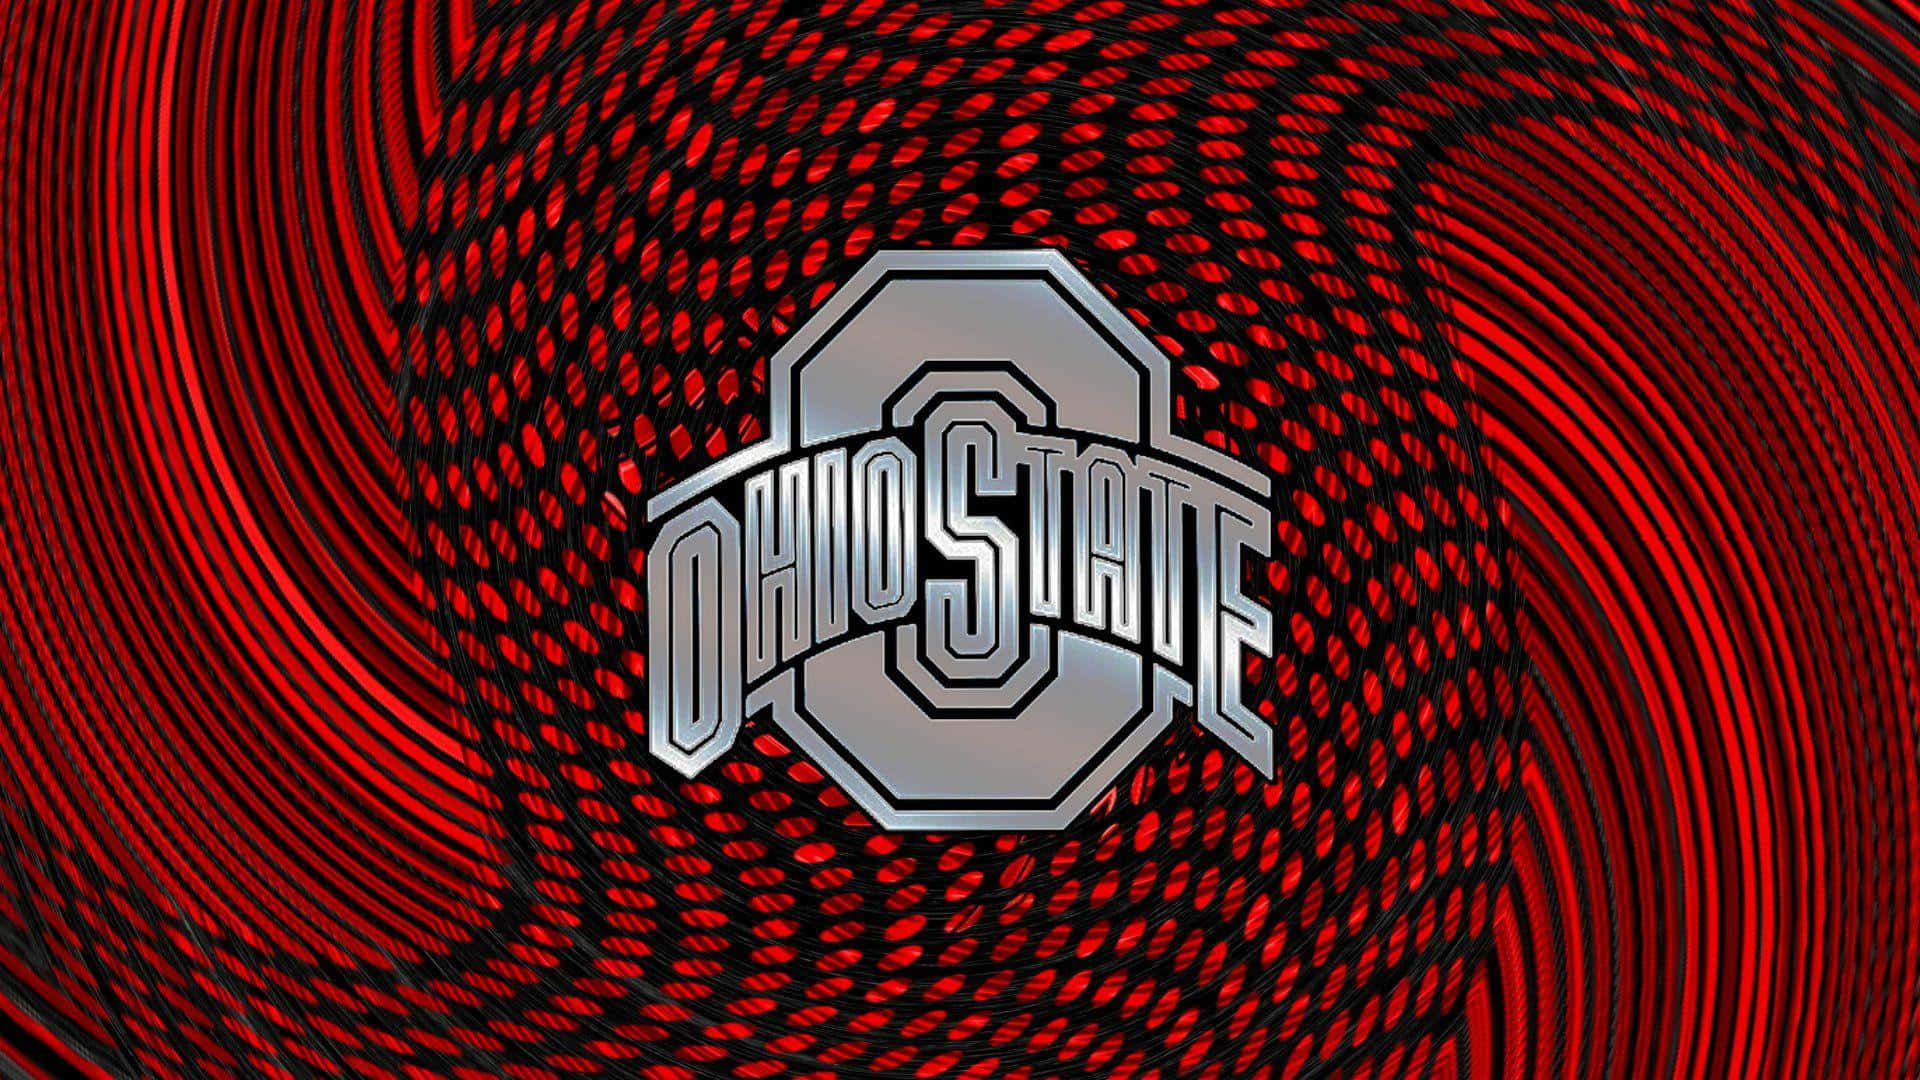 Ohio State Logo On A Red Background Wallpaper